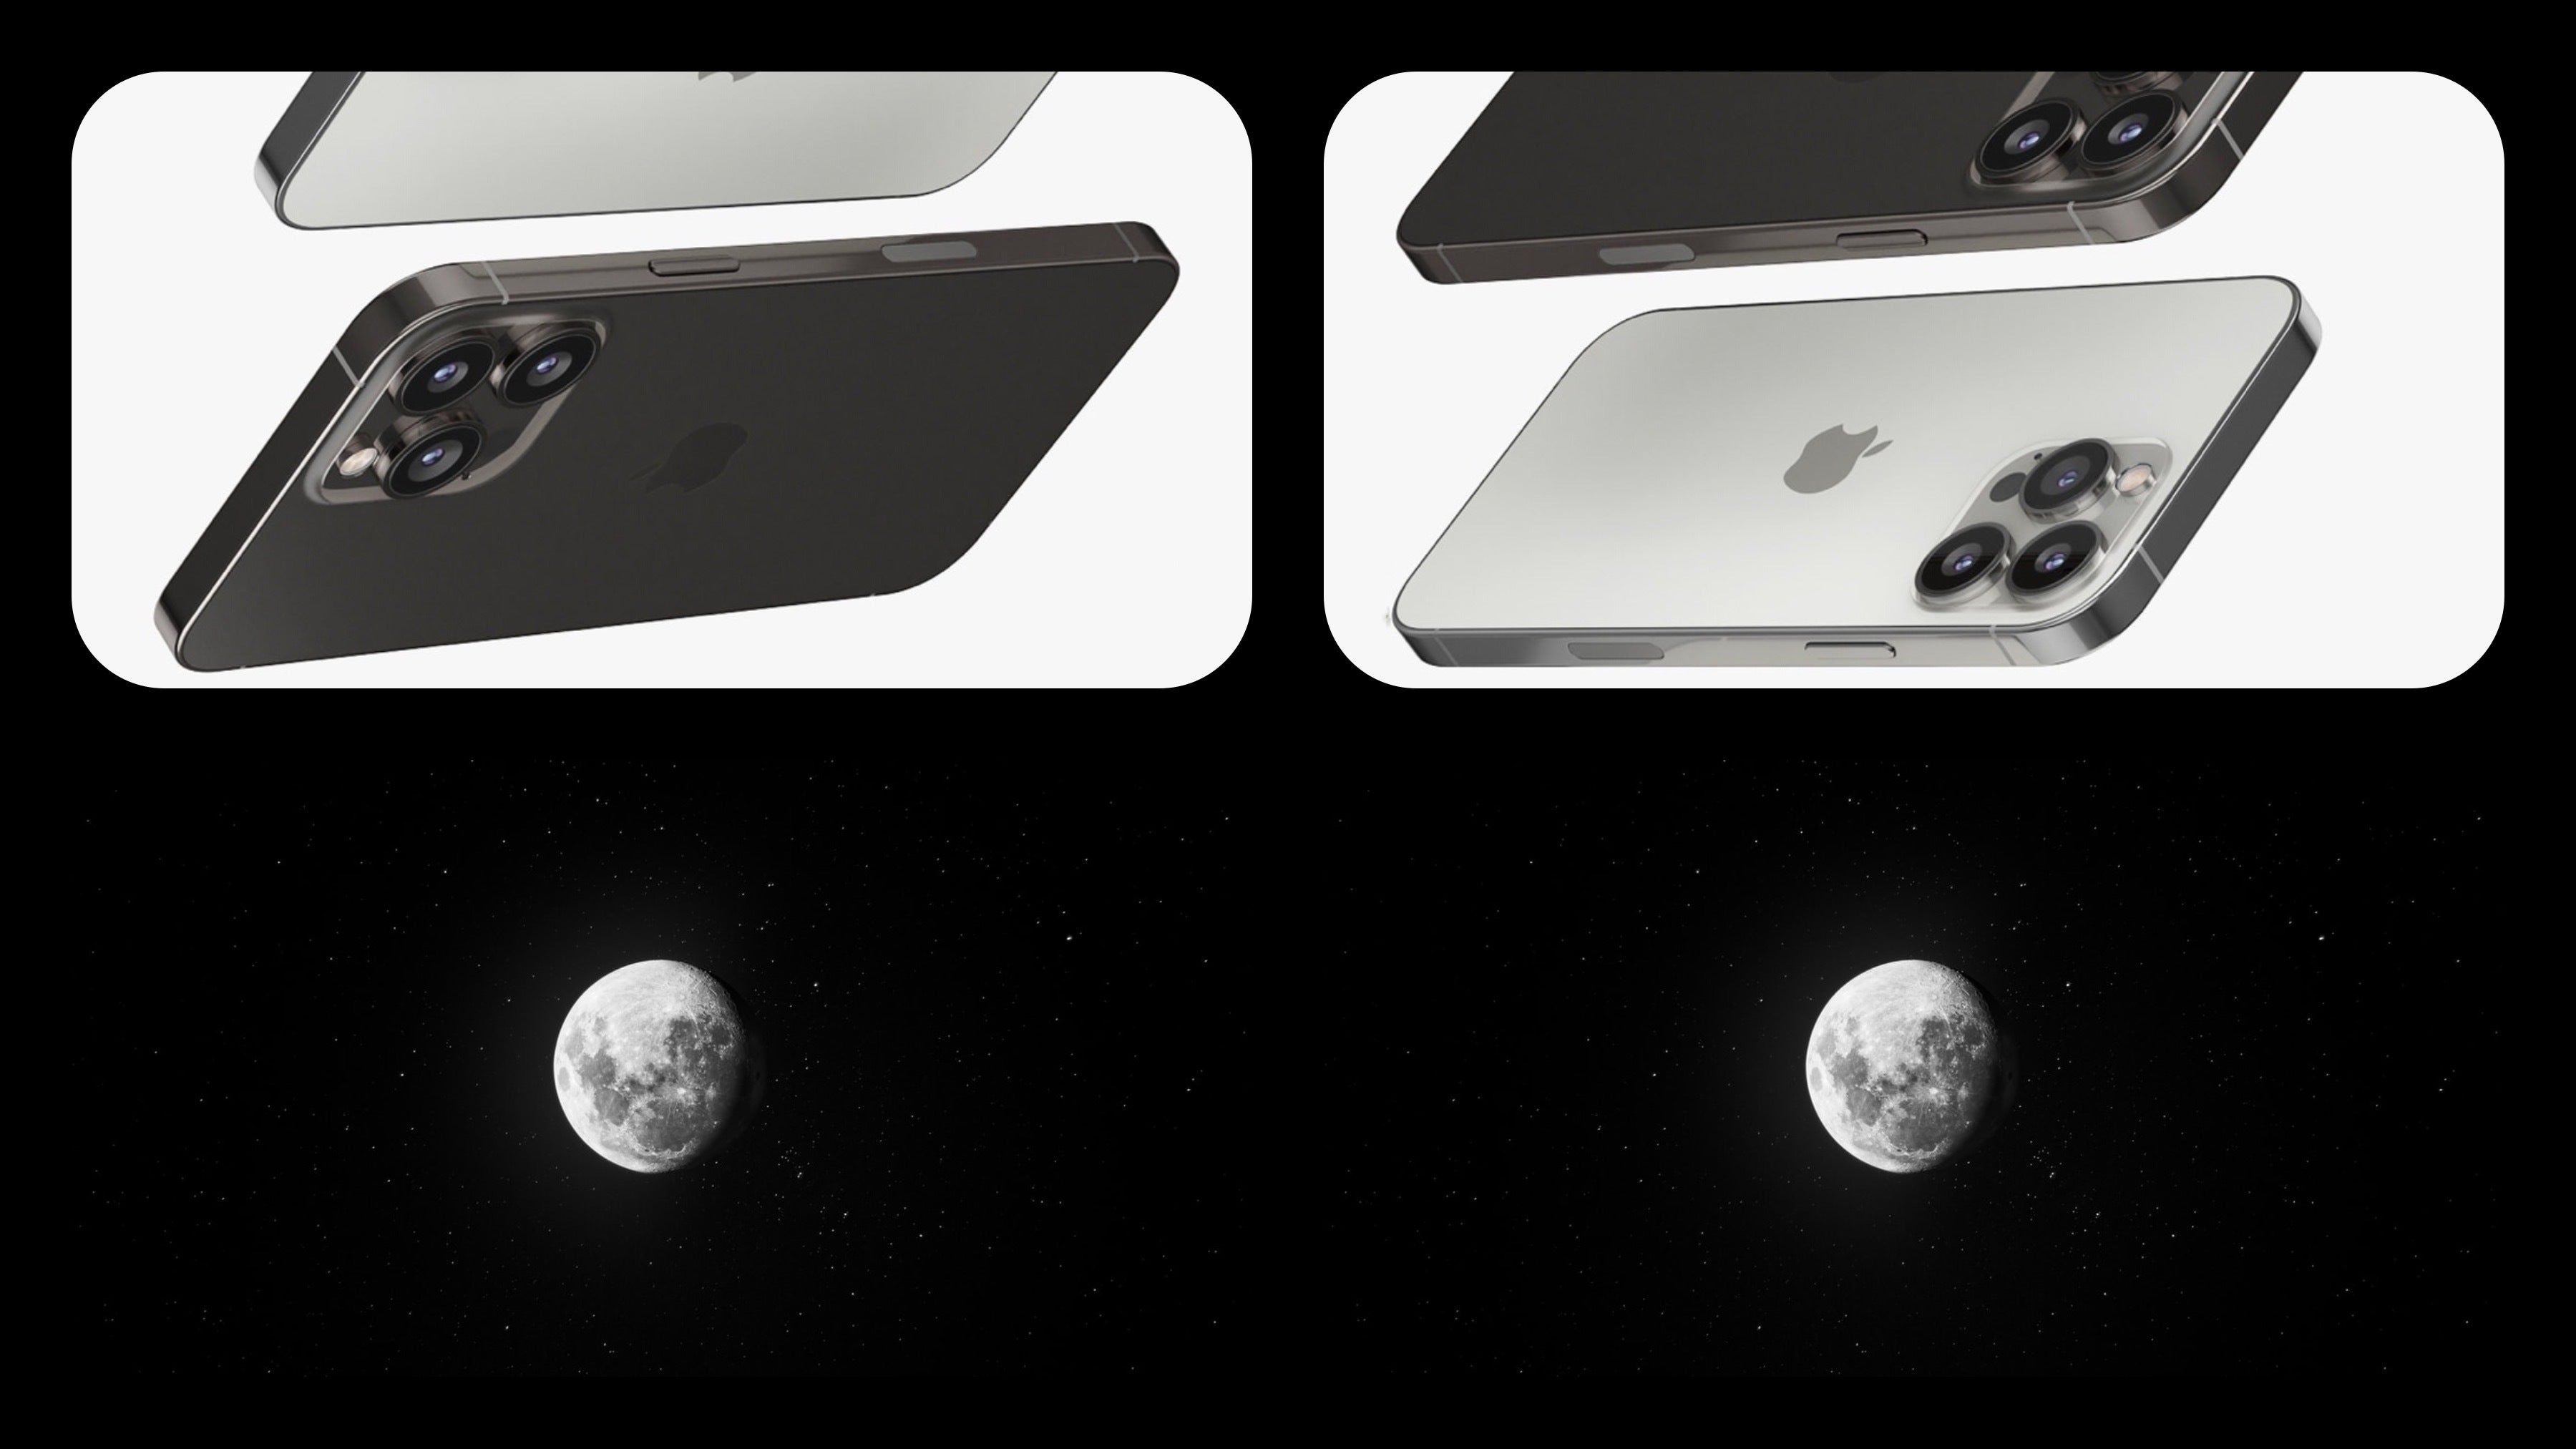 iPhone 13 Pro Max with &quot;5x optical zoom range&quot;: Prepare for Apple&#039;s September 14 math exam